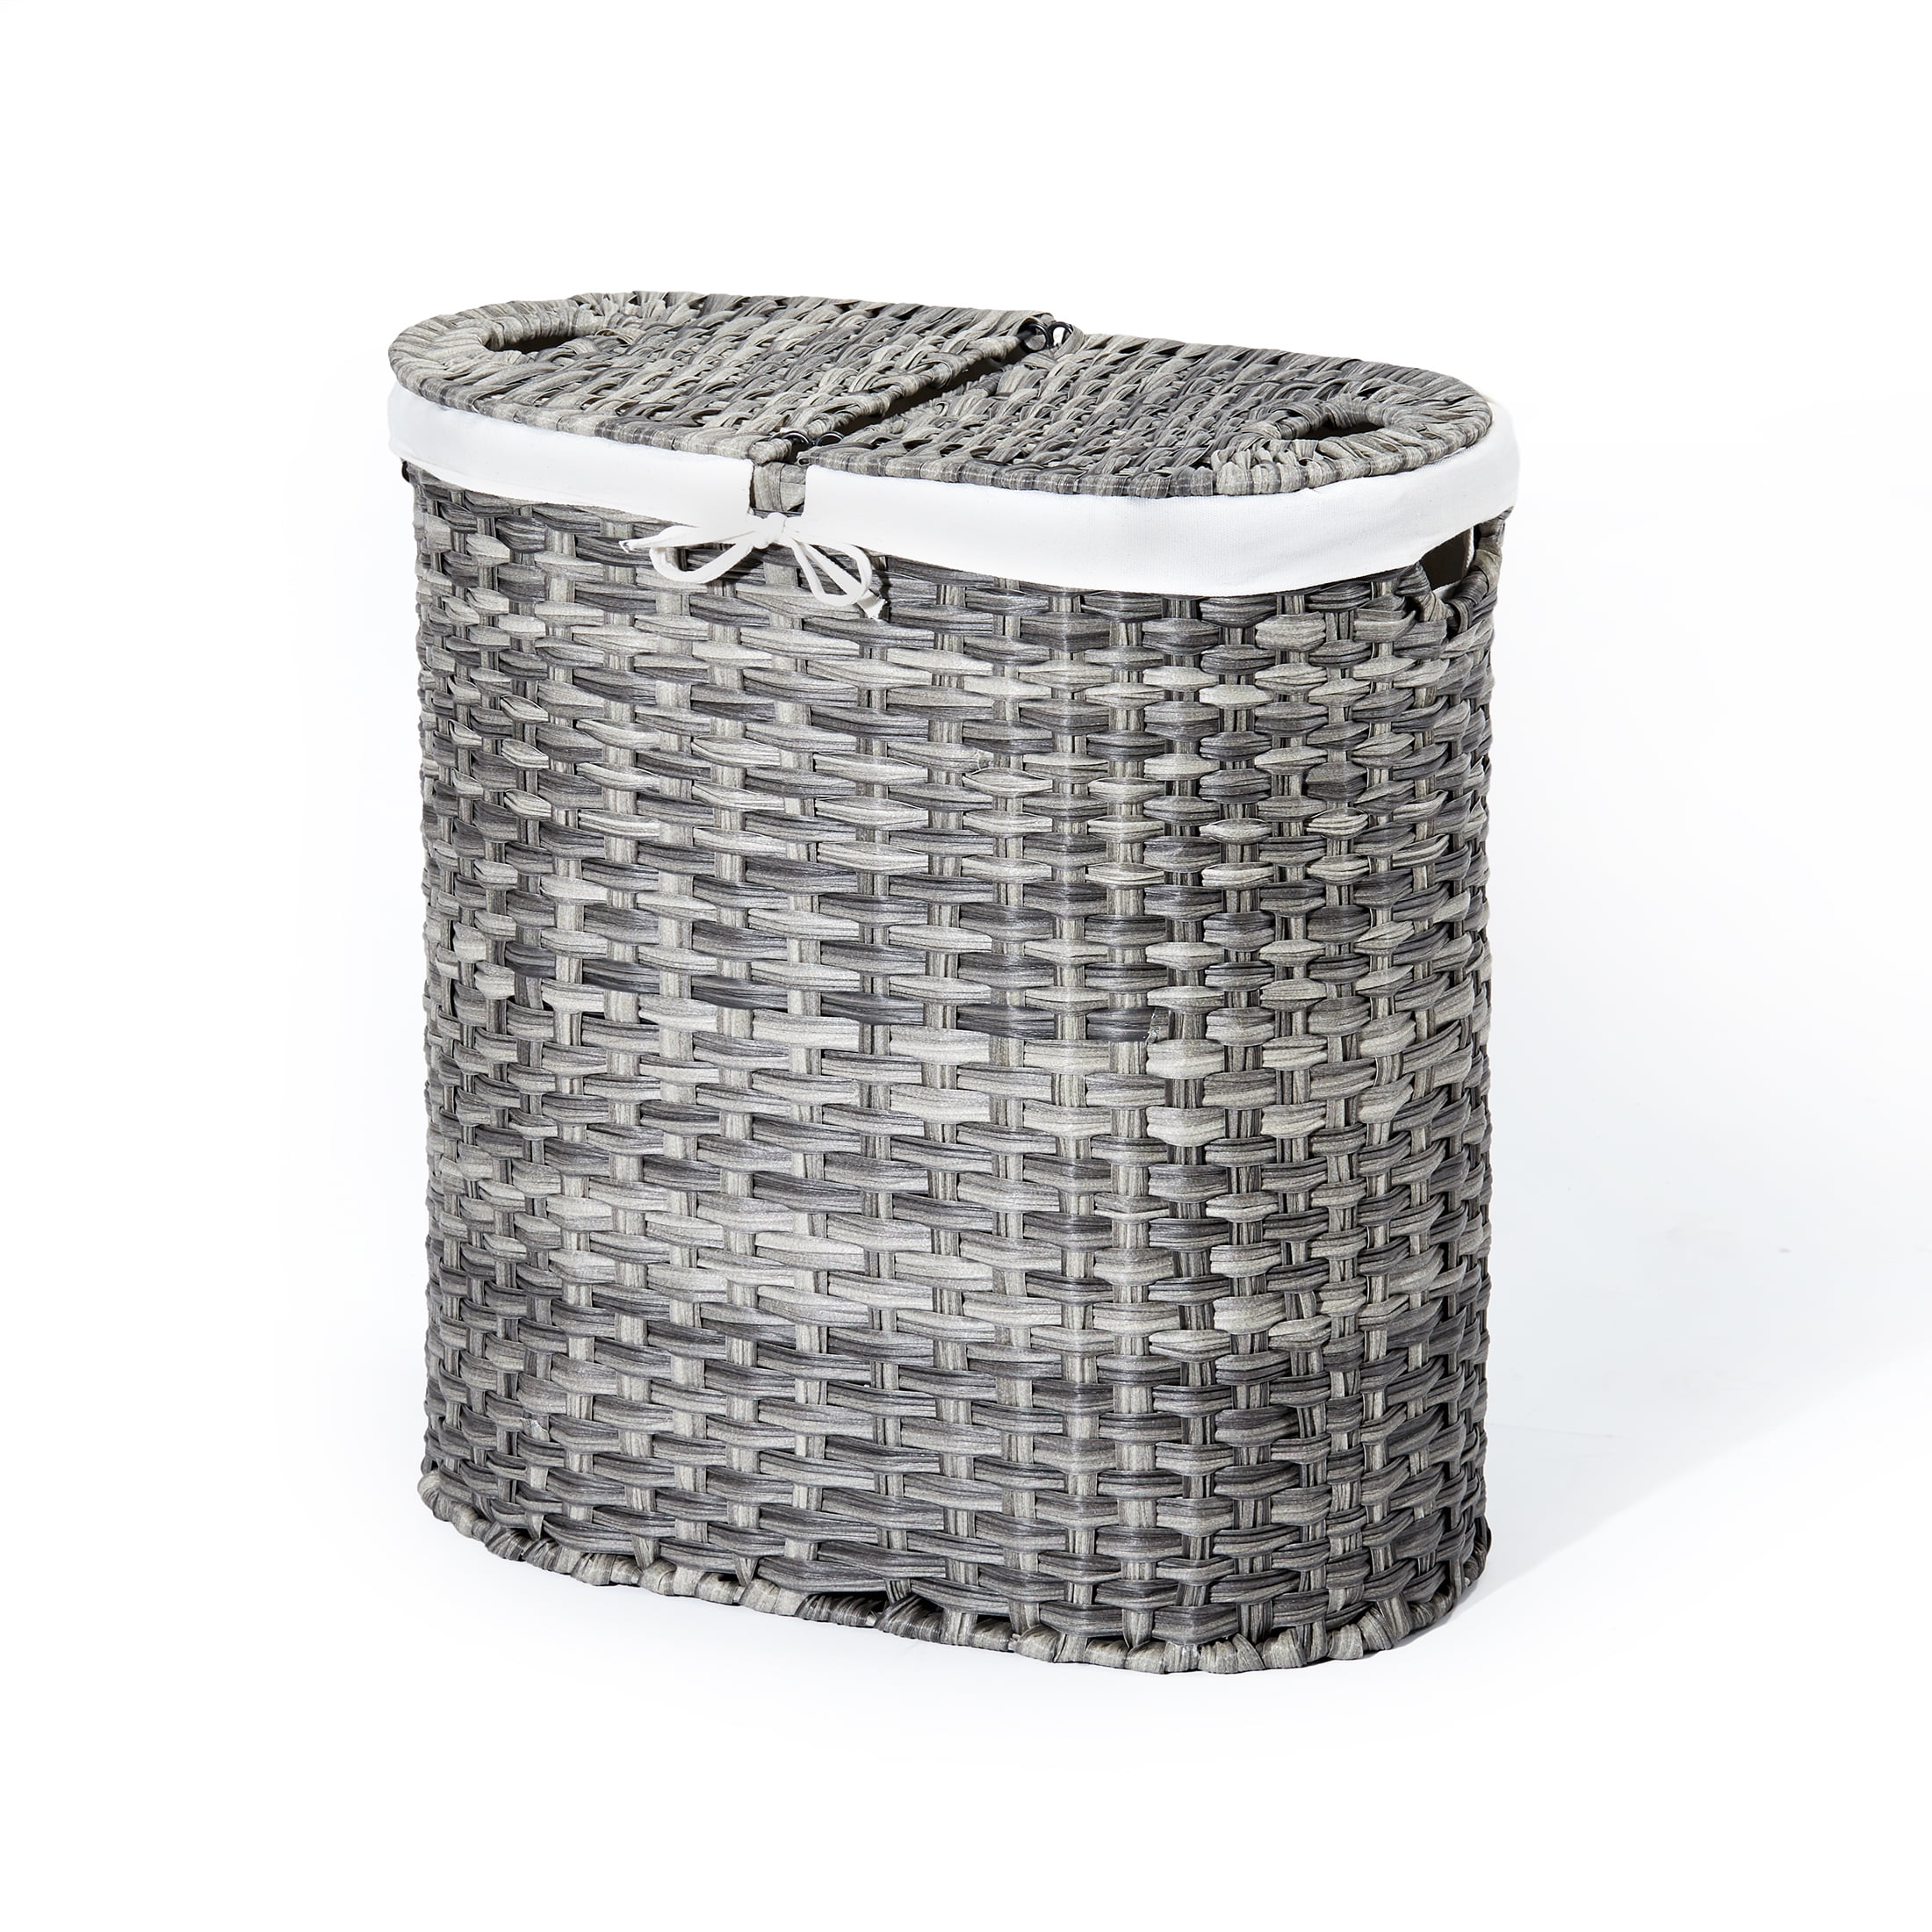 Mindspace Double Laundry Hamper with Lid and Removable Mesh Bags 